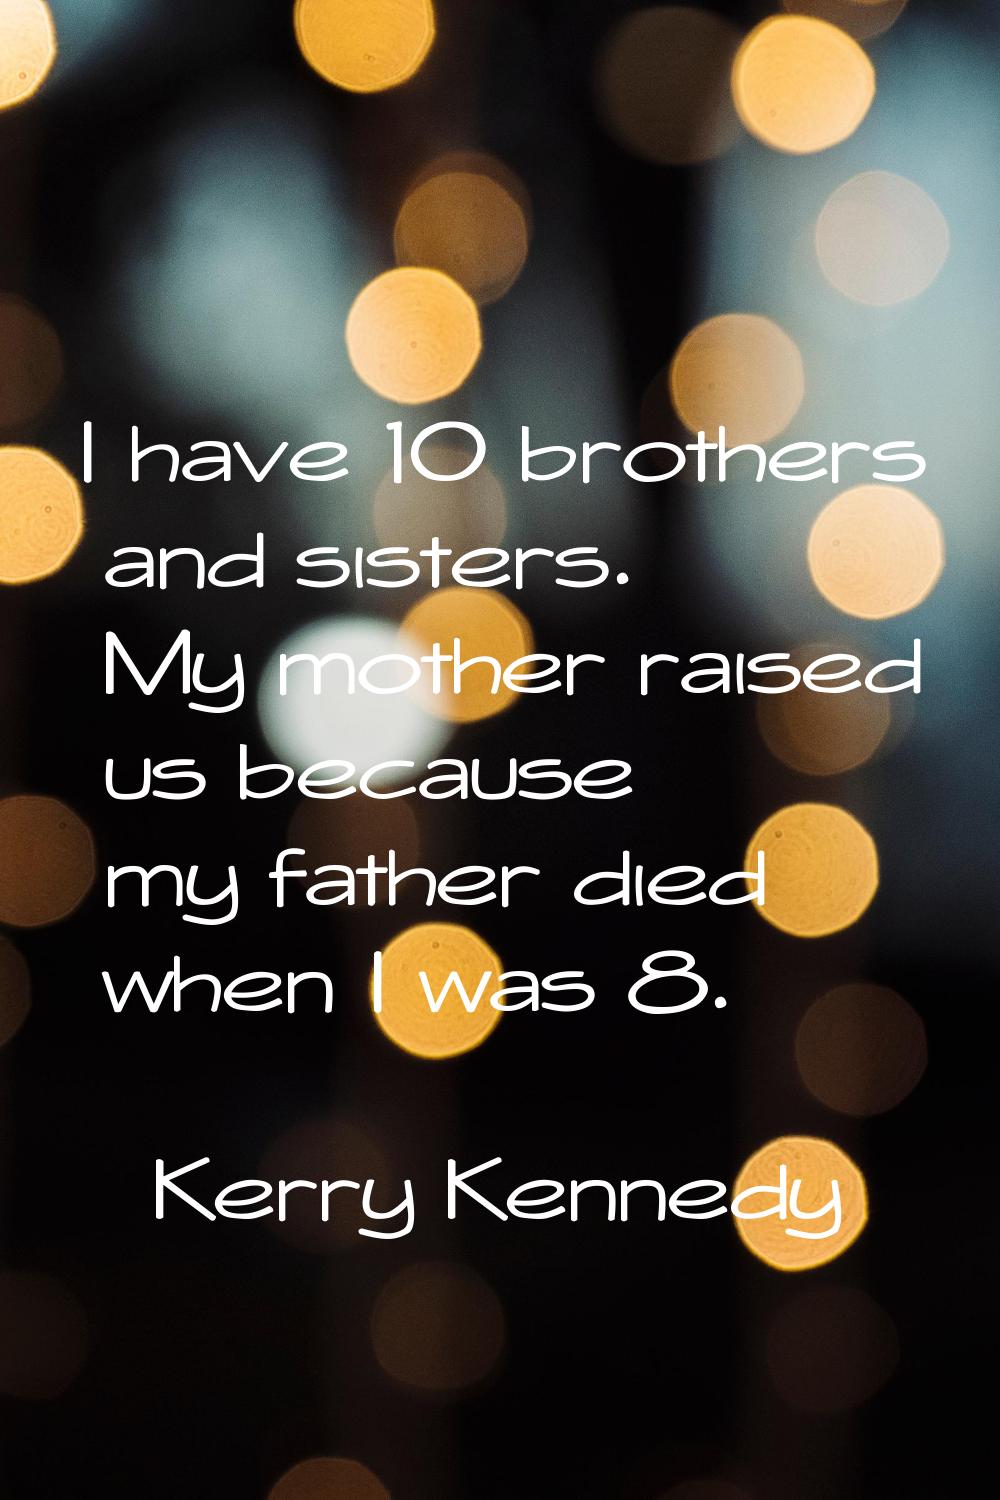 I have 10 brothers and sisters. My mother raised us because my father died when I was 8.